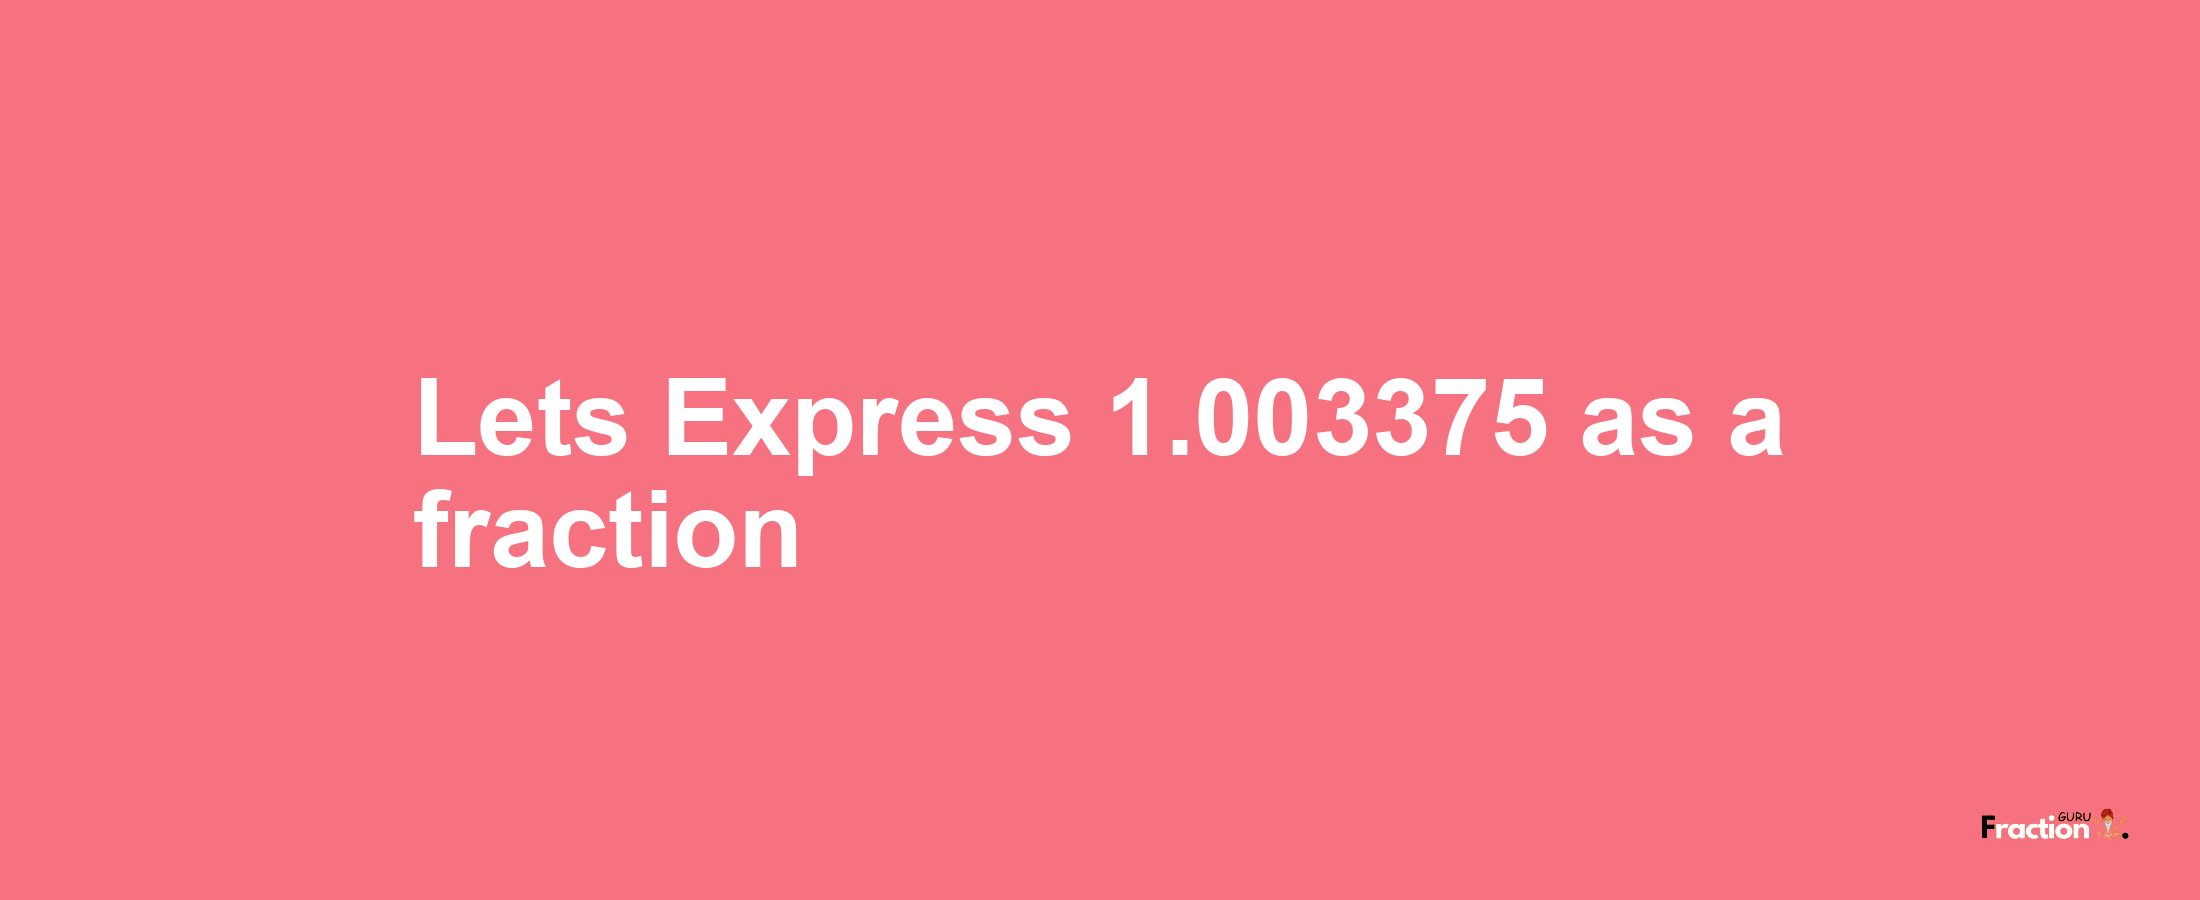 Lets Express 1.003375 as afraction